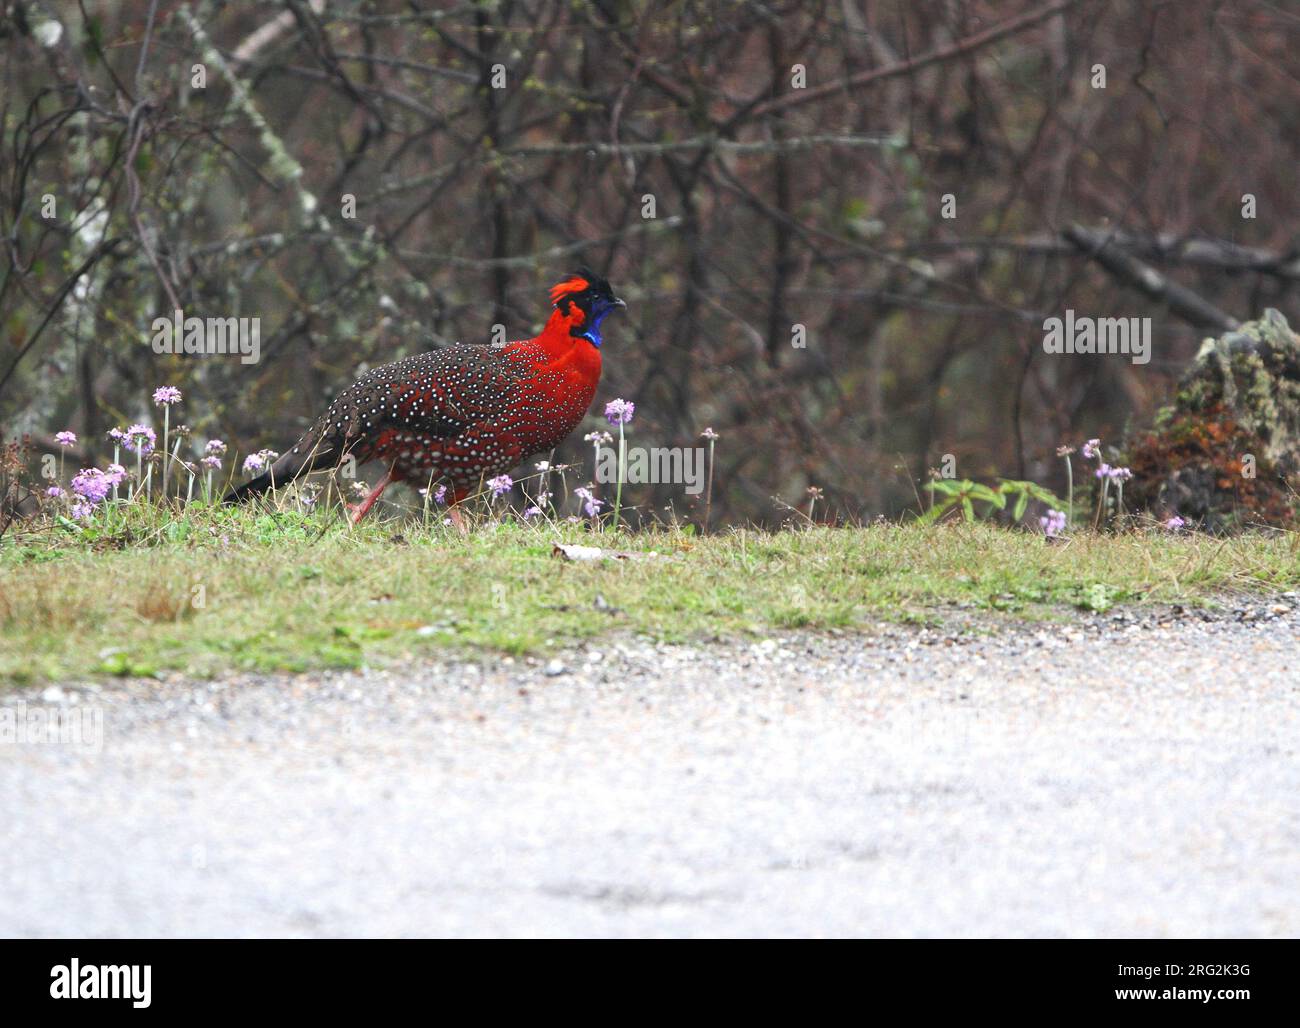 Male Satyr Tragopan (Tragopan satyra) crossing a road in Himalayan Bhutan. Also also known as the Crimson Horned Pheasant. Stock Photo